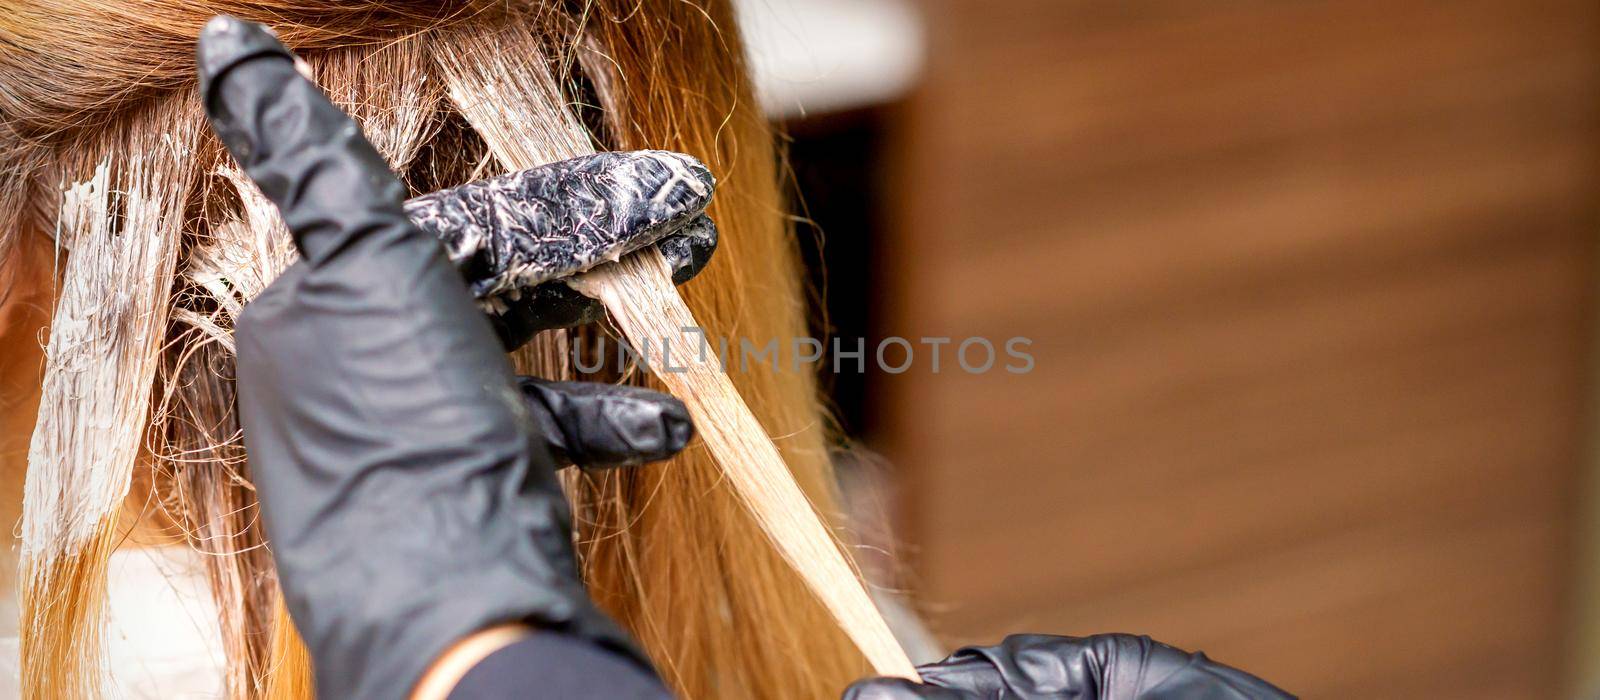 Closeup back view of hairdresser's hands in gloves applying dye to a strand of hair of redhead young woman in a hair salon